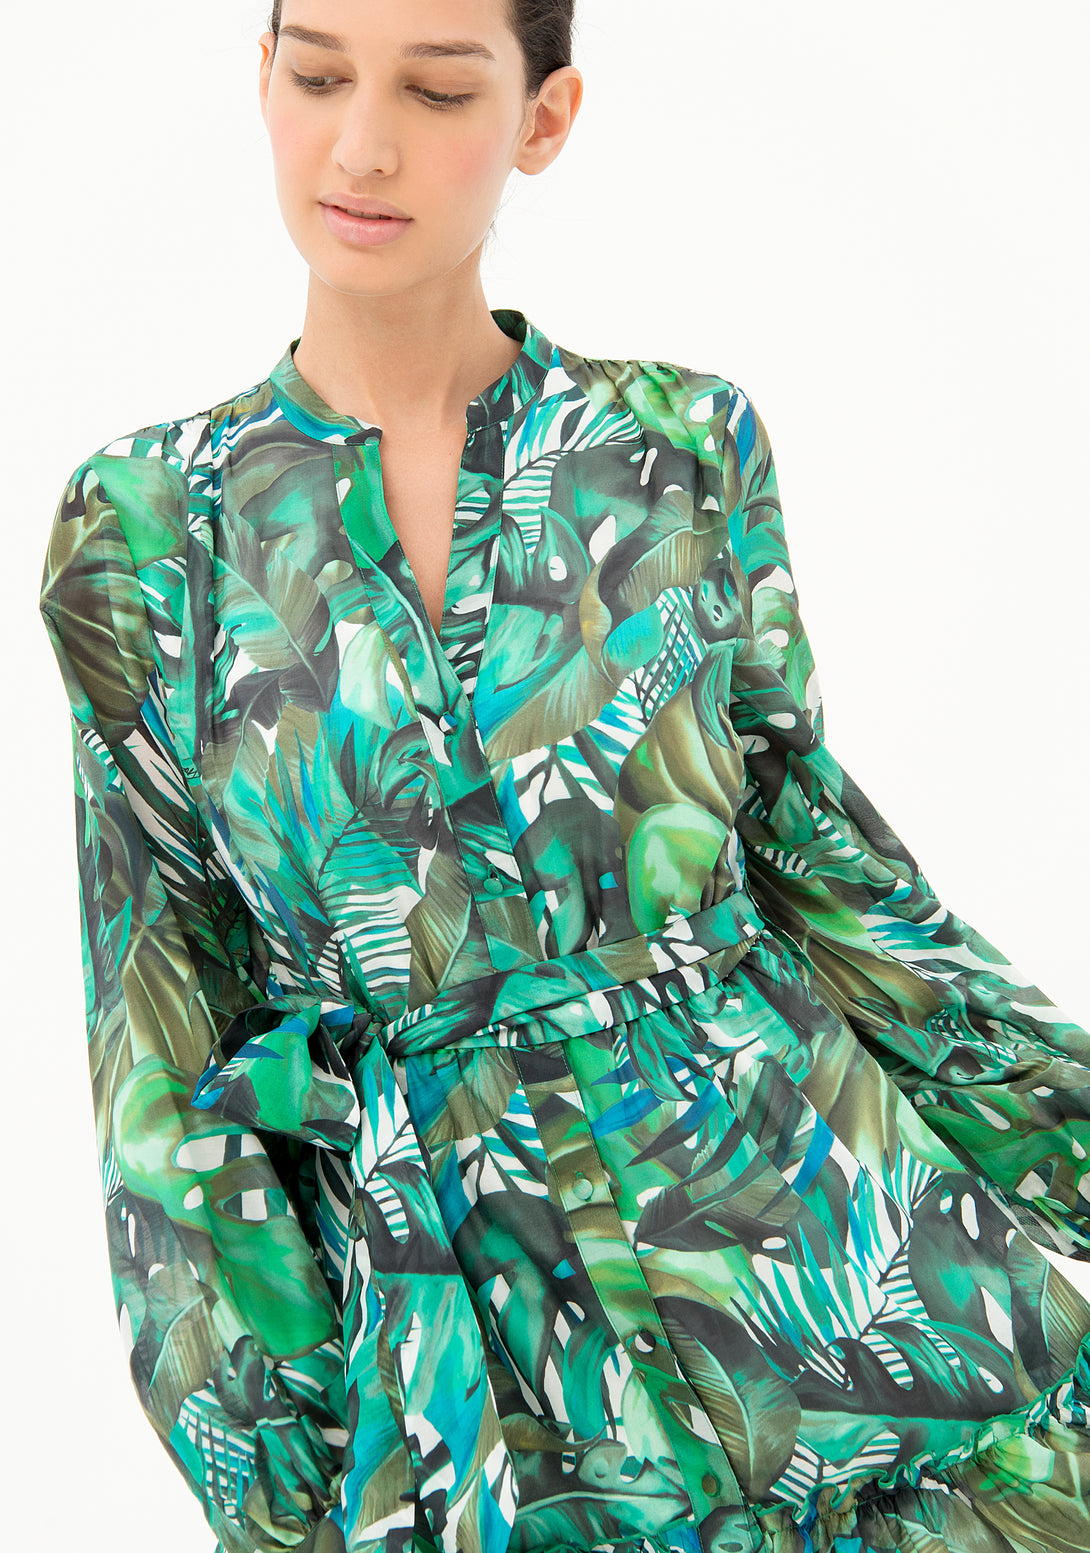 Chemisier dress A-shaped with tropical pattern